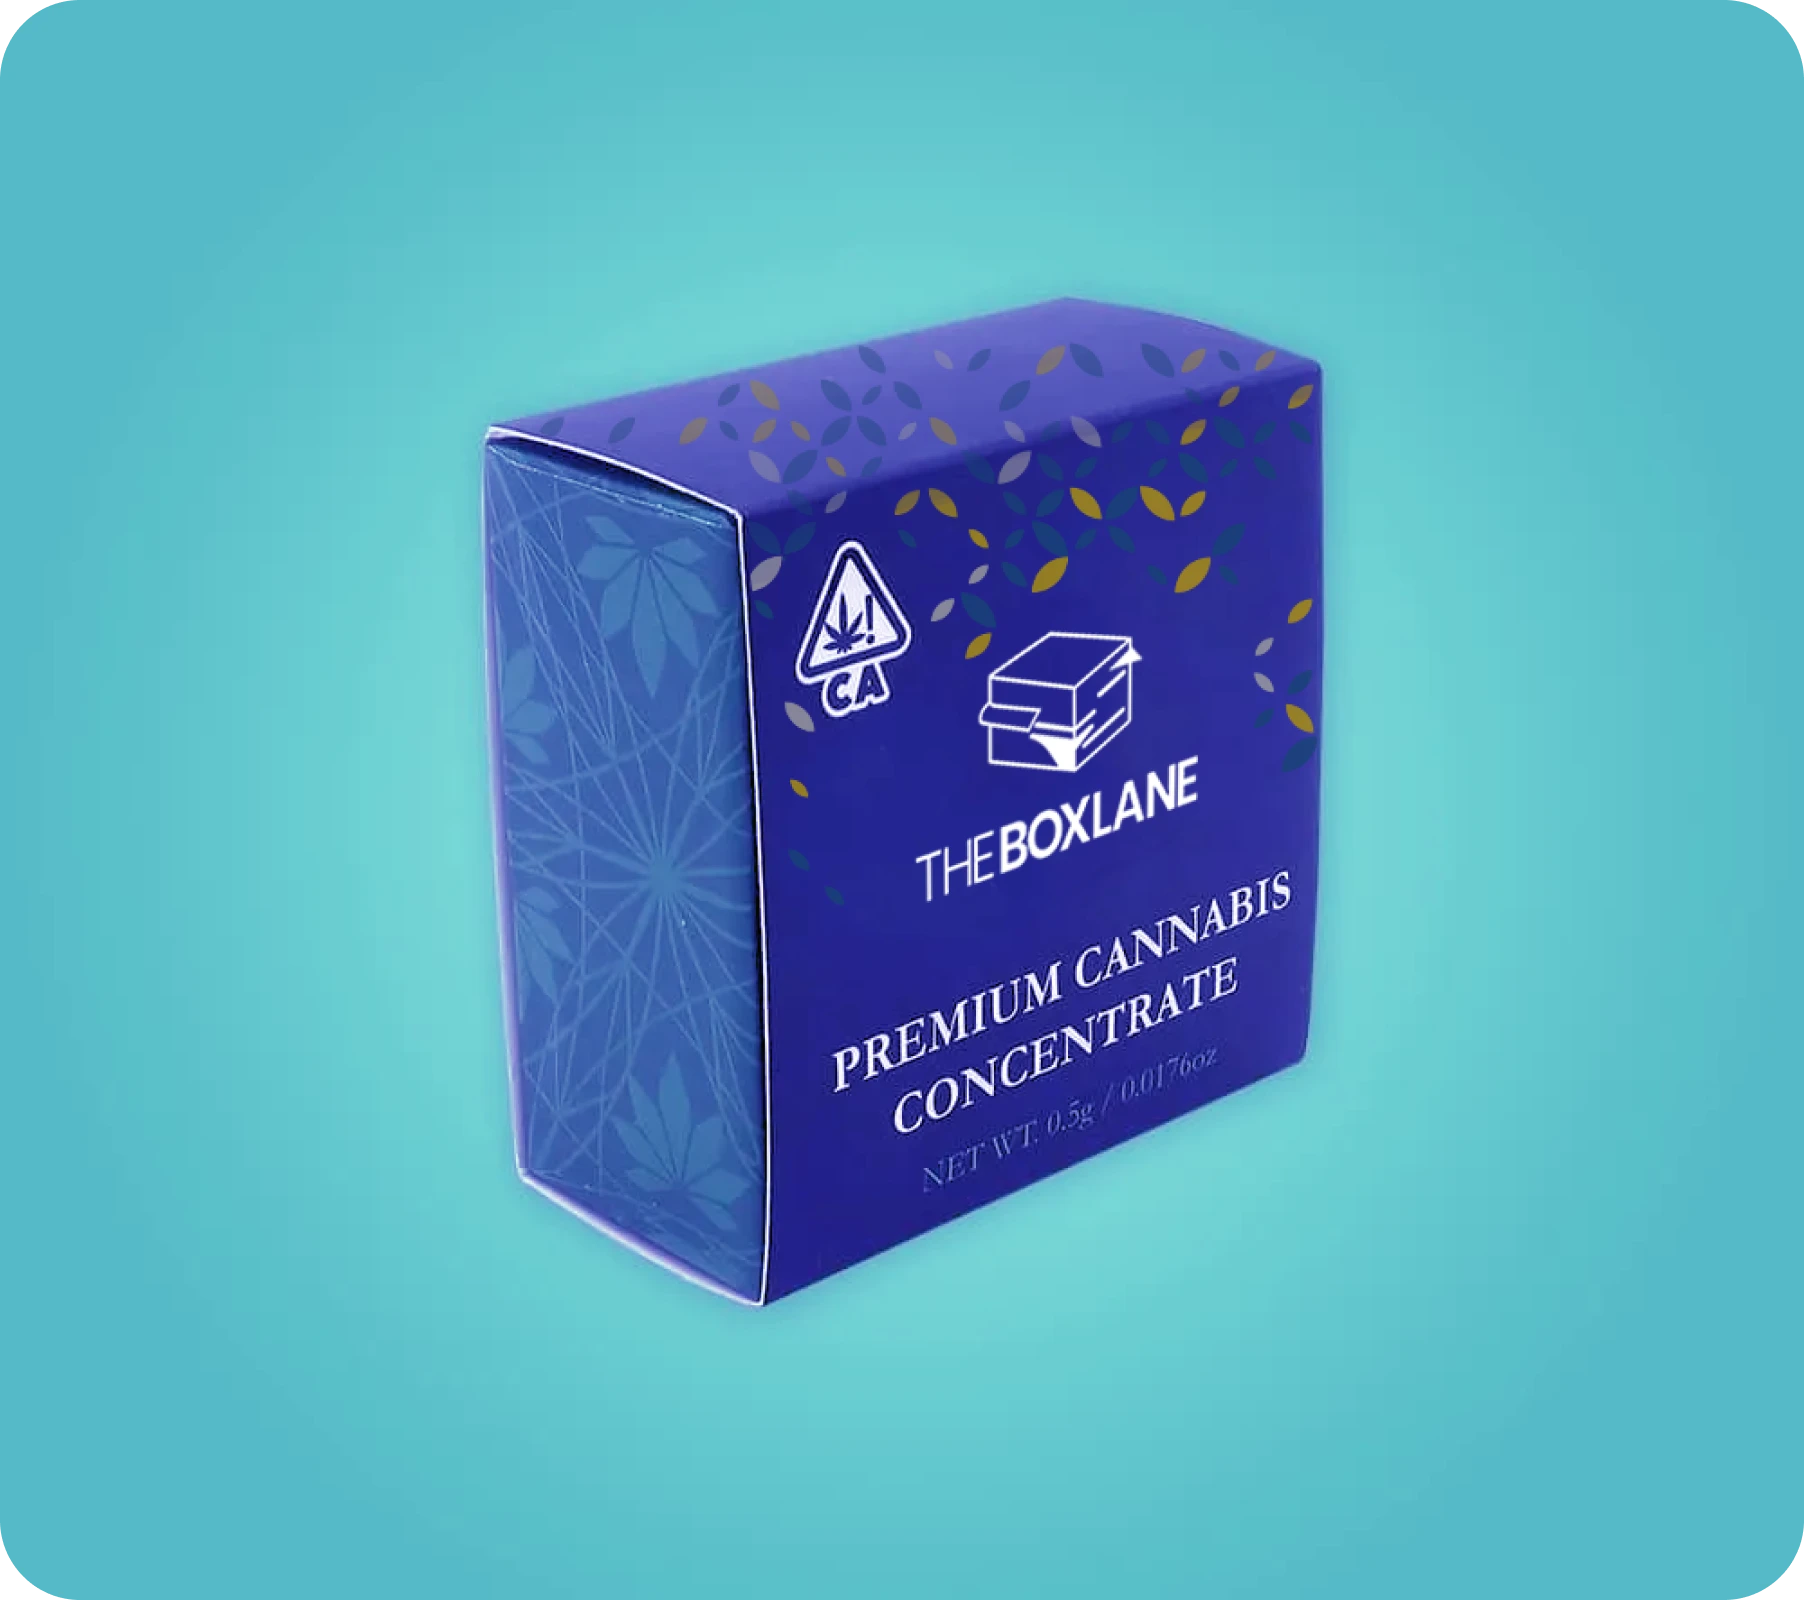 Choose The Box Lane for Effortless, Exceptional Cannabis Packaging | The Box Lane